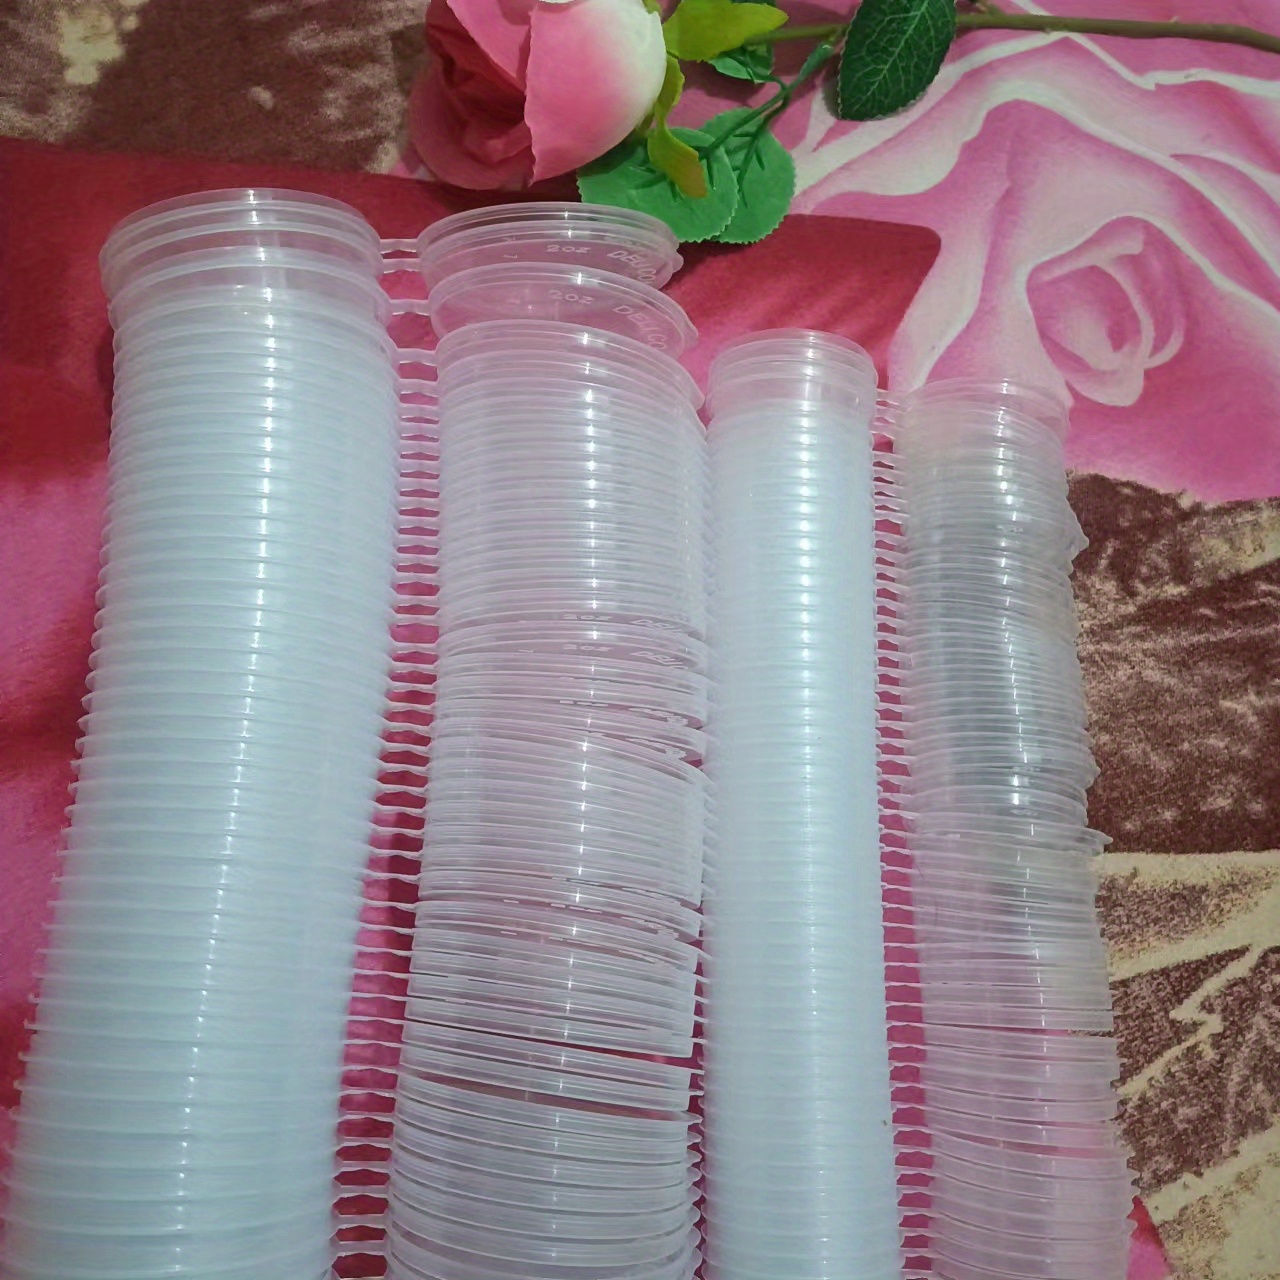 Food Containers - Plastic Household Containers Manufacturer from Rajkot